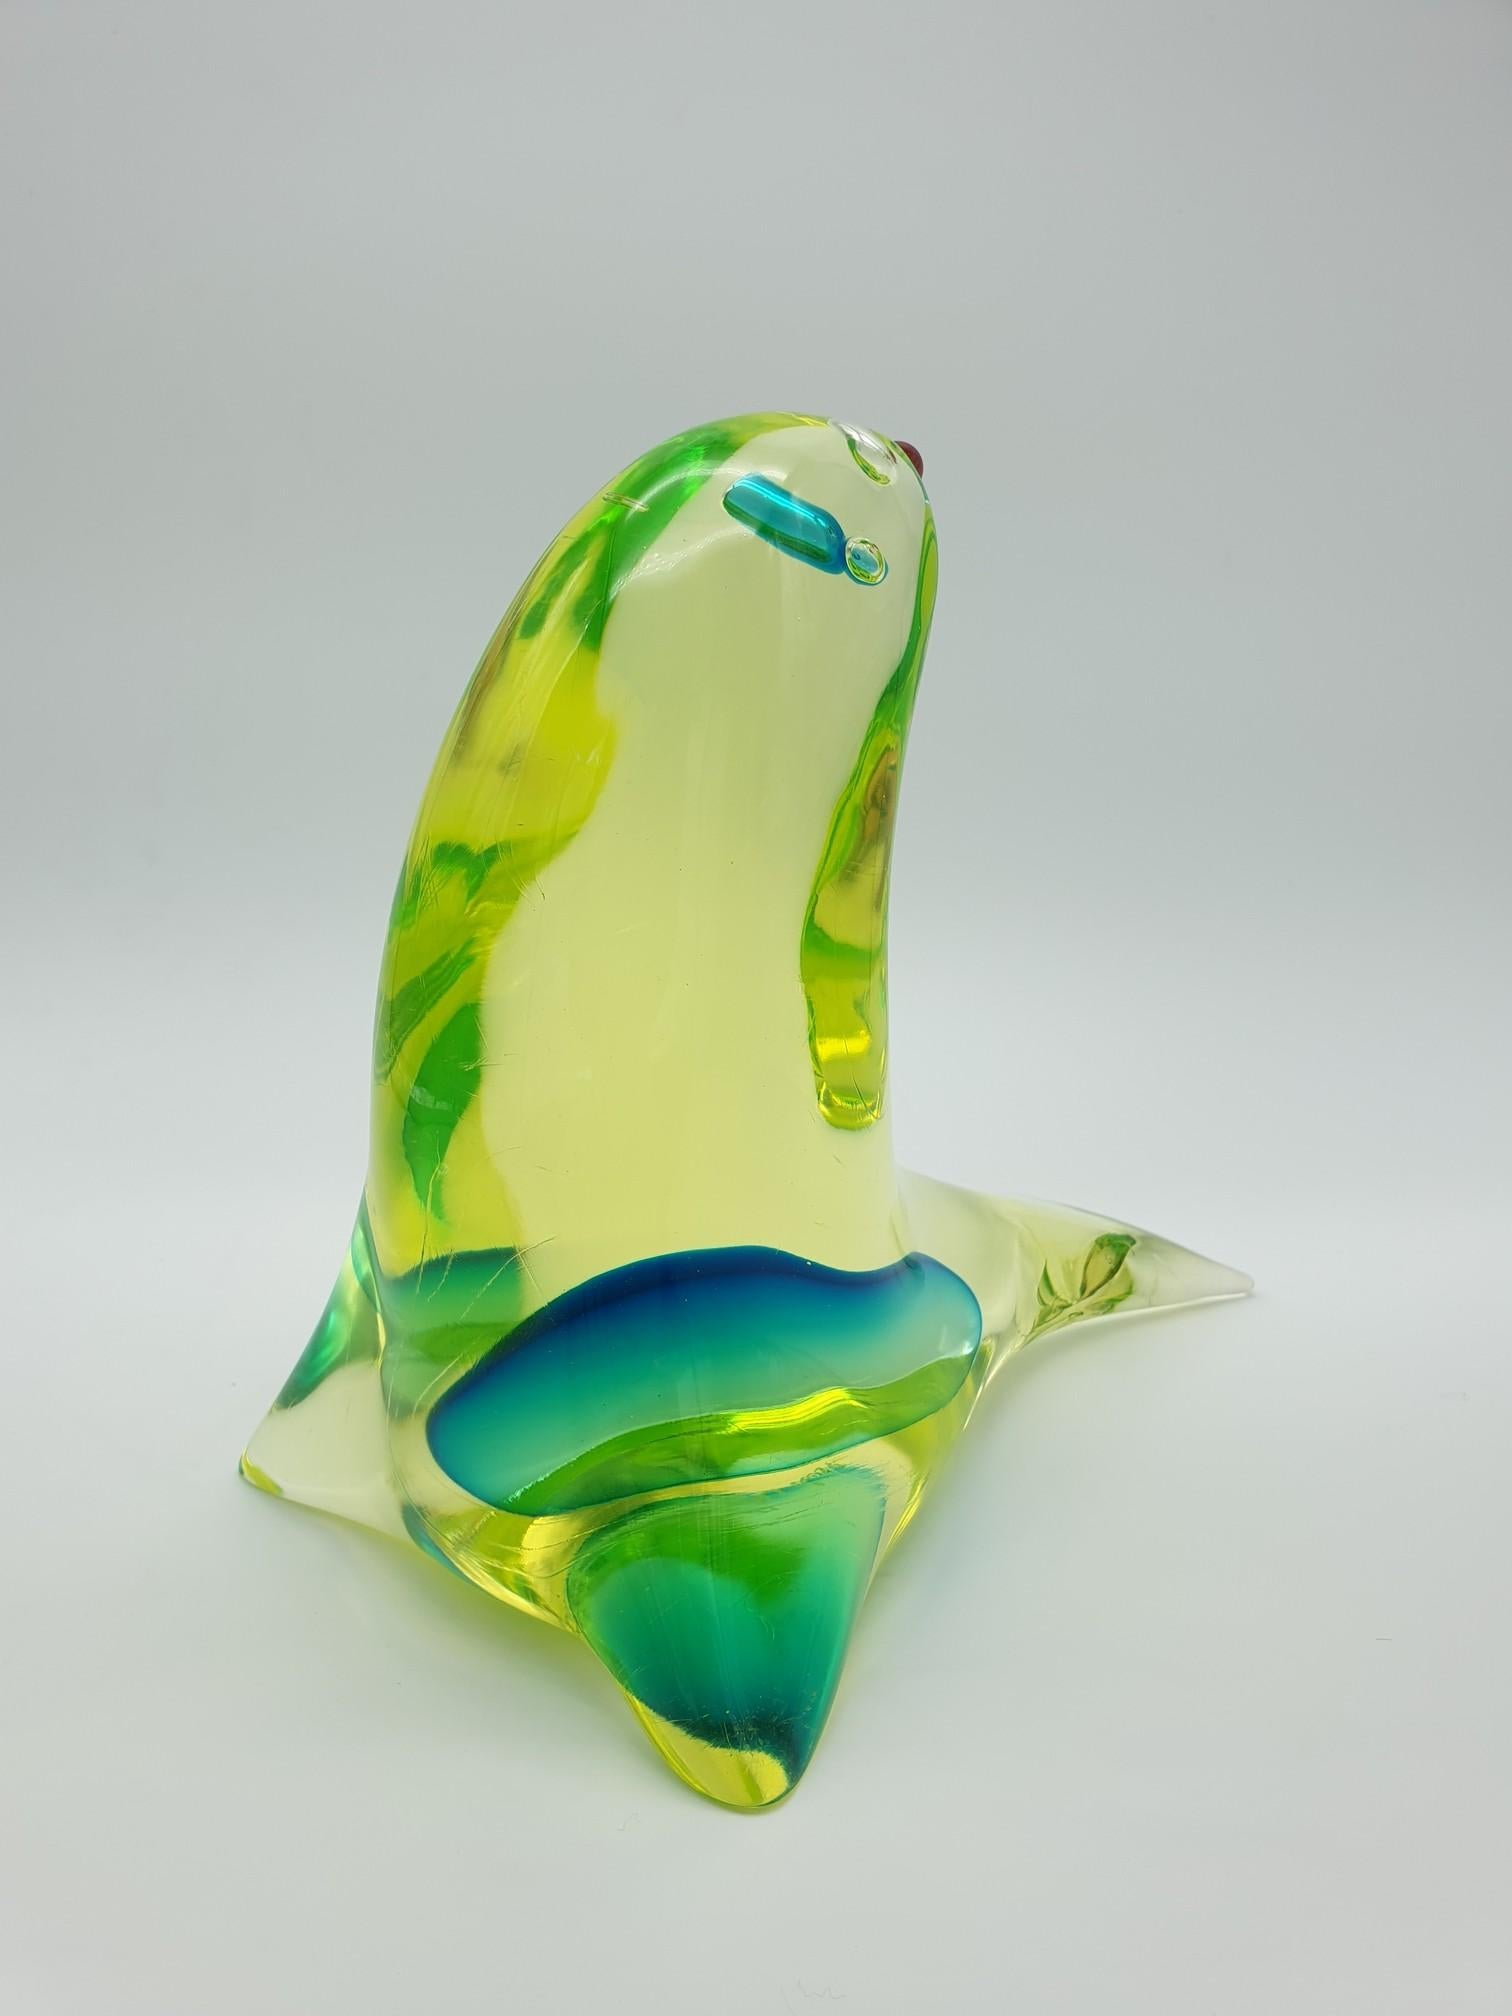 This cute baby seal was made in the mid-1960s in Murano by the glass-factory Gino Cenedese e Figlio and desigend by Antonio da Ros. The seal is made in vaseline yellow glass, with a splash of vivid turquoise color, and detailed with matching